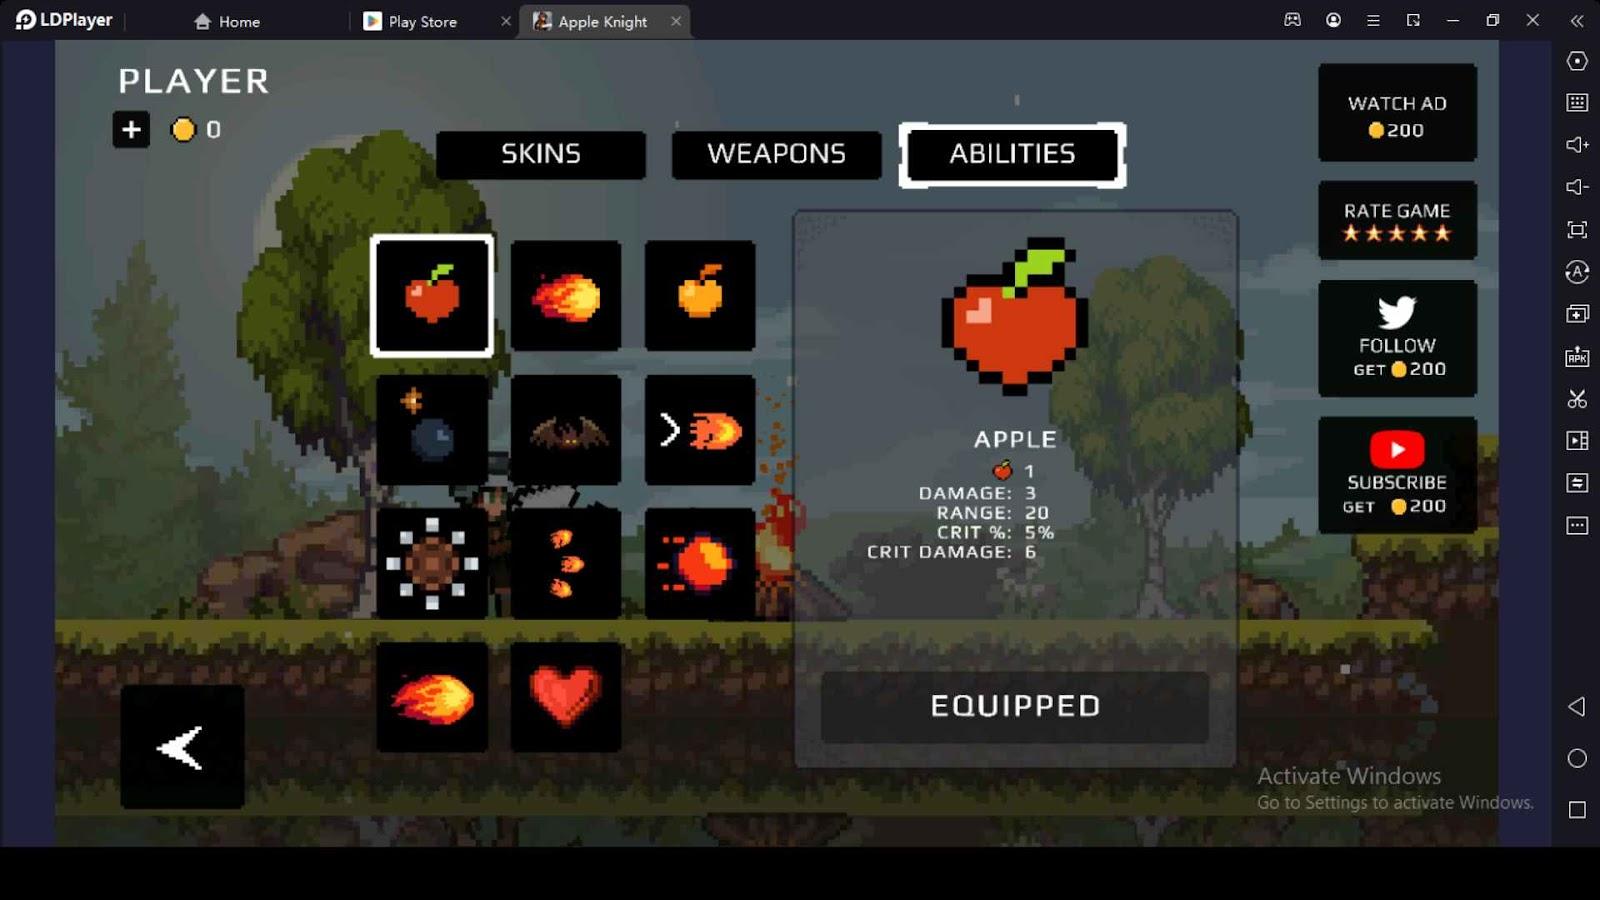 Apple Knight Dungeons gameplay 